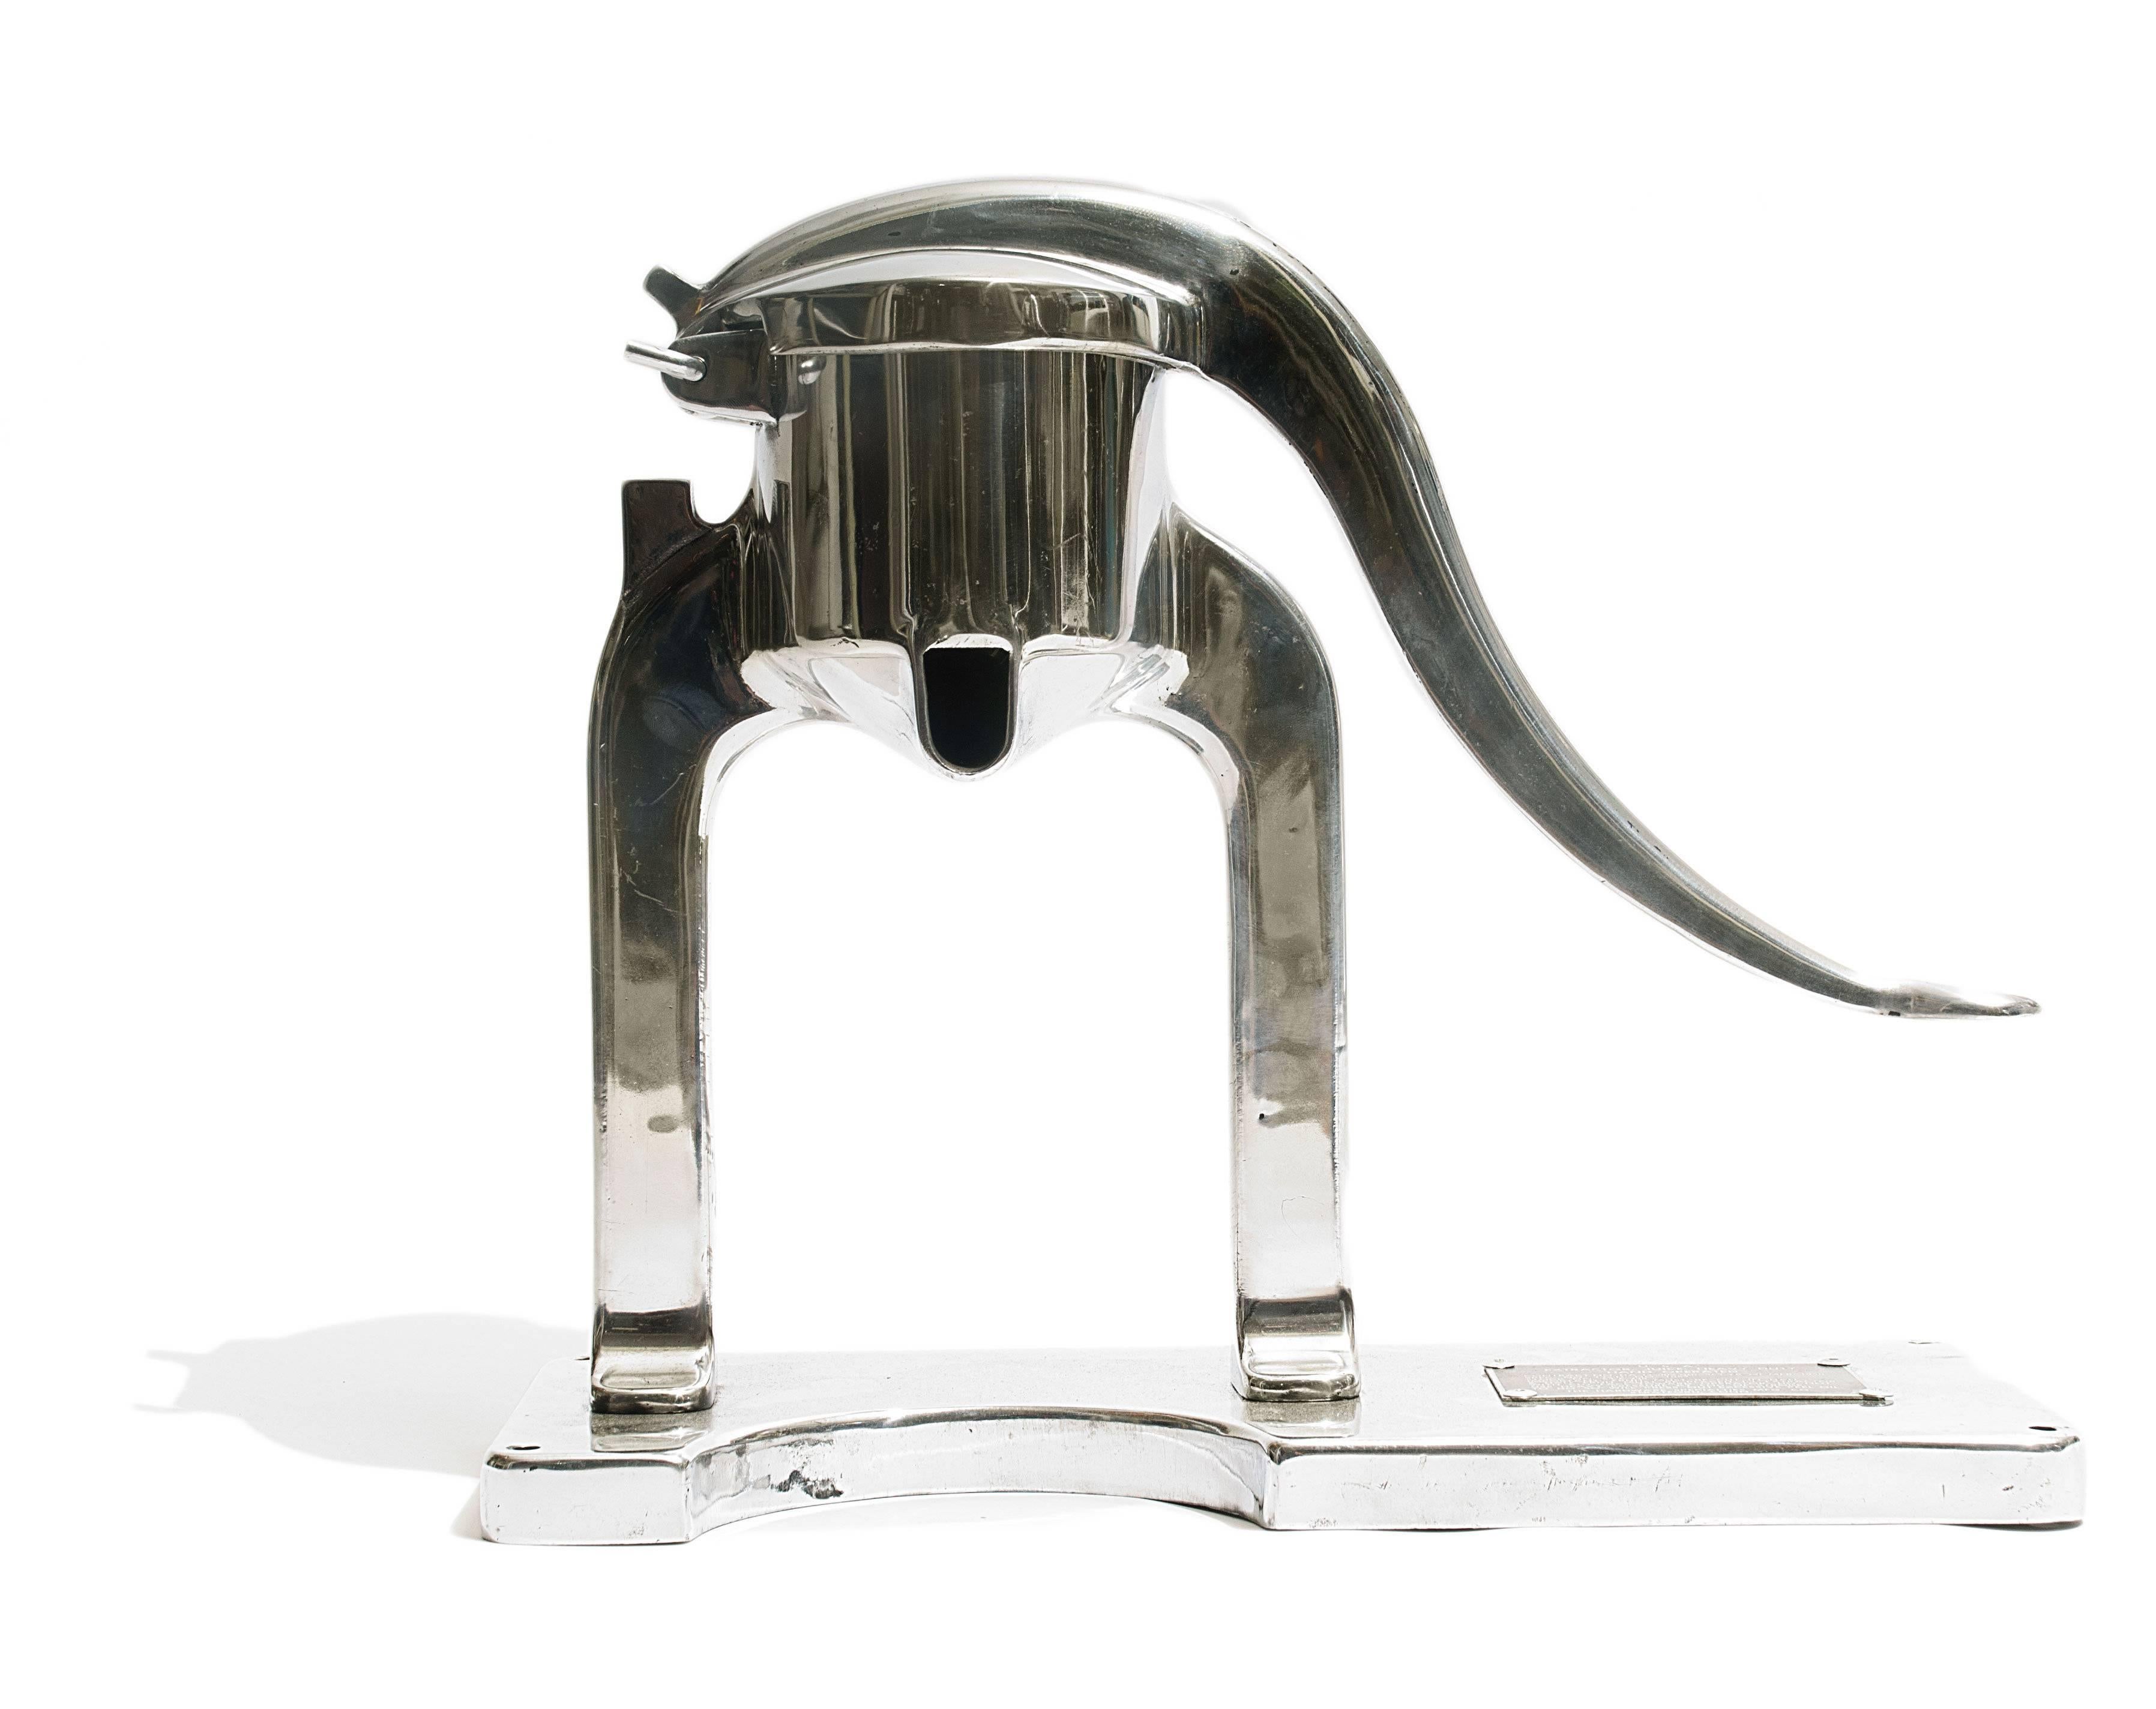 Industrial juicer from the hardware specialties Mfg. Co. This high quality manual appliance has a hand polished aluminum finish.